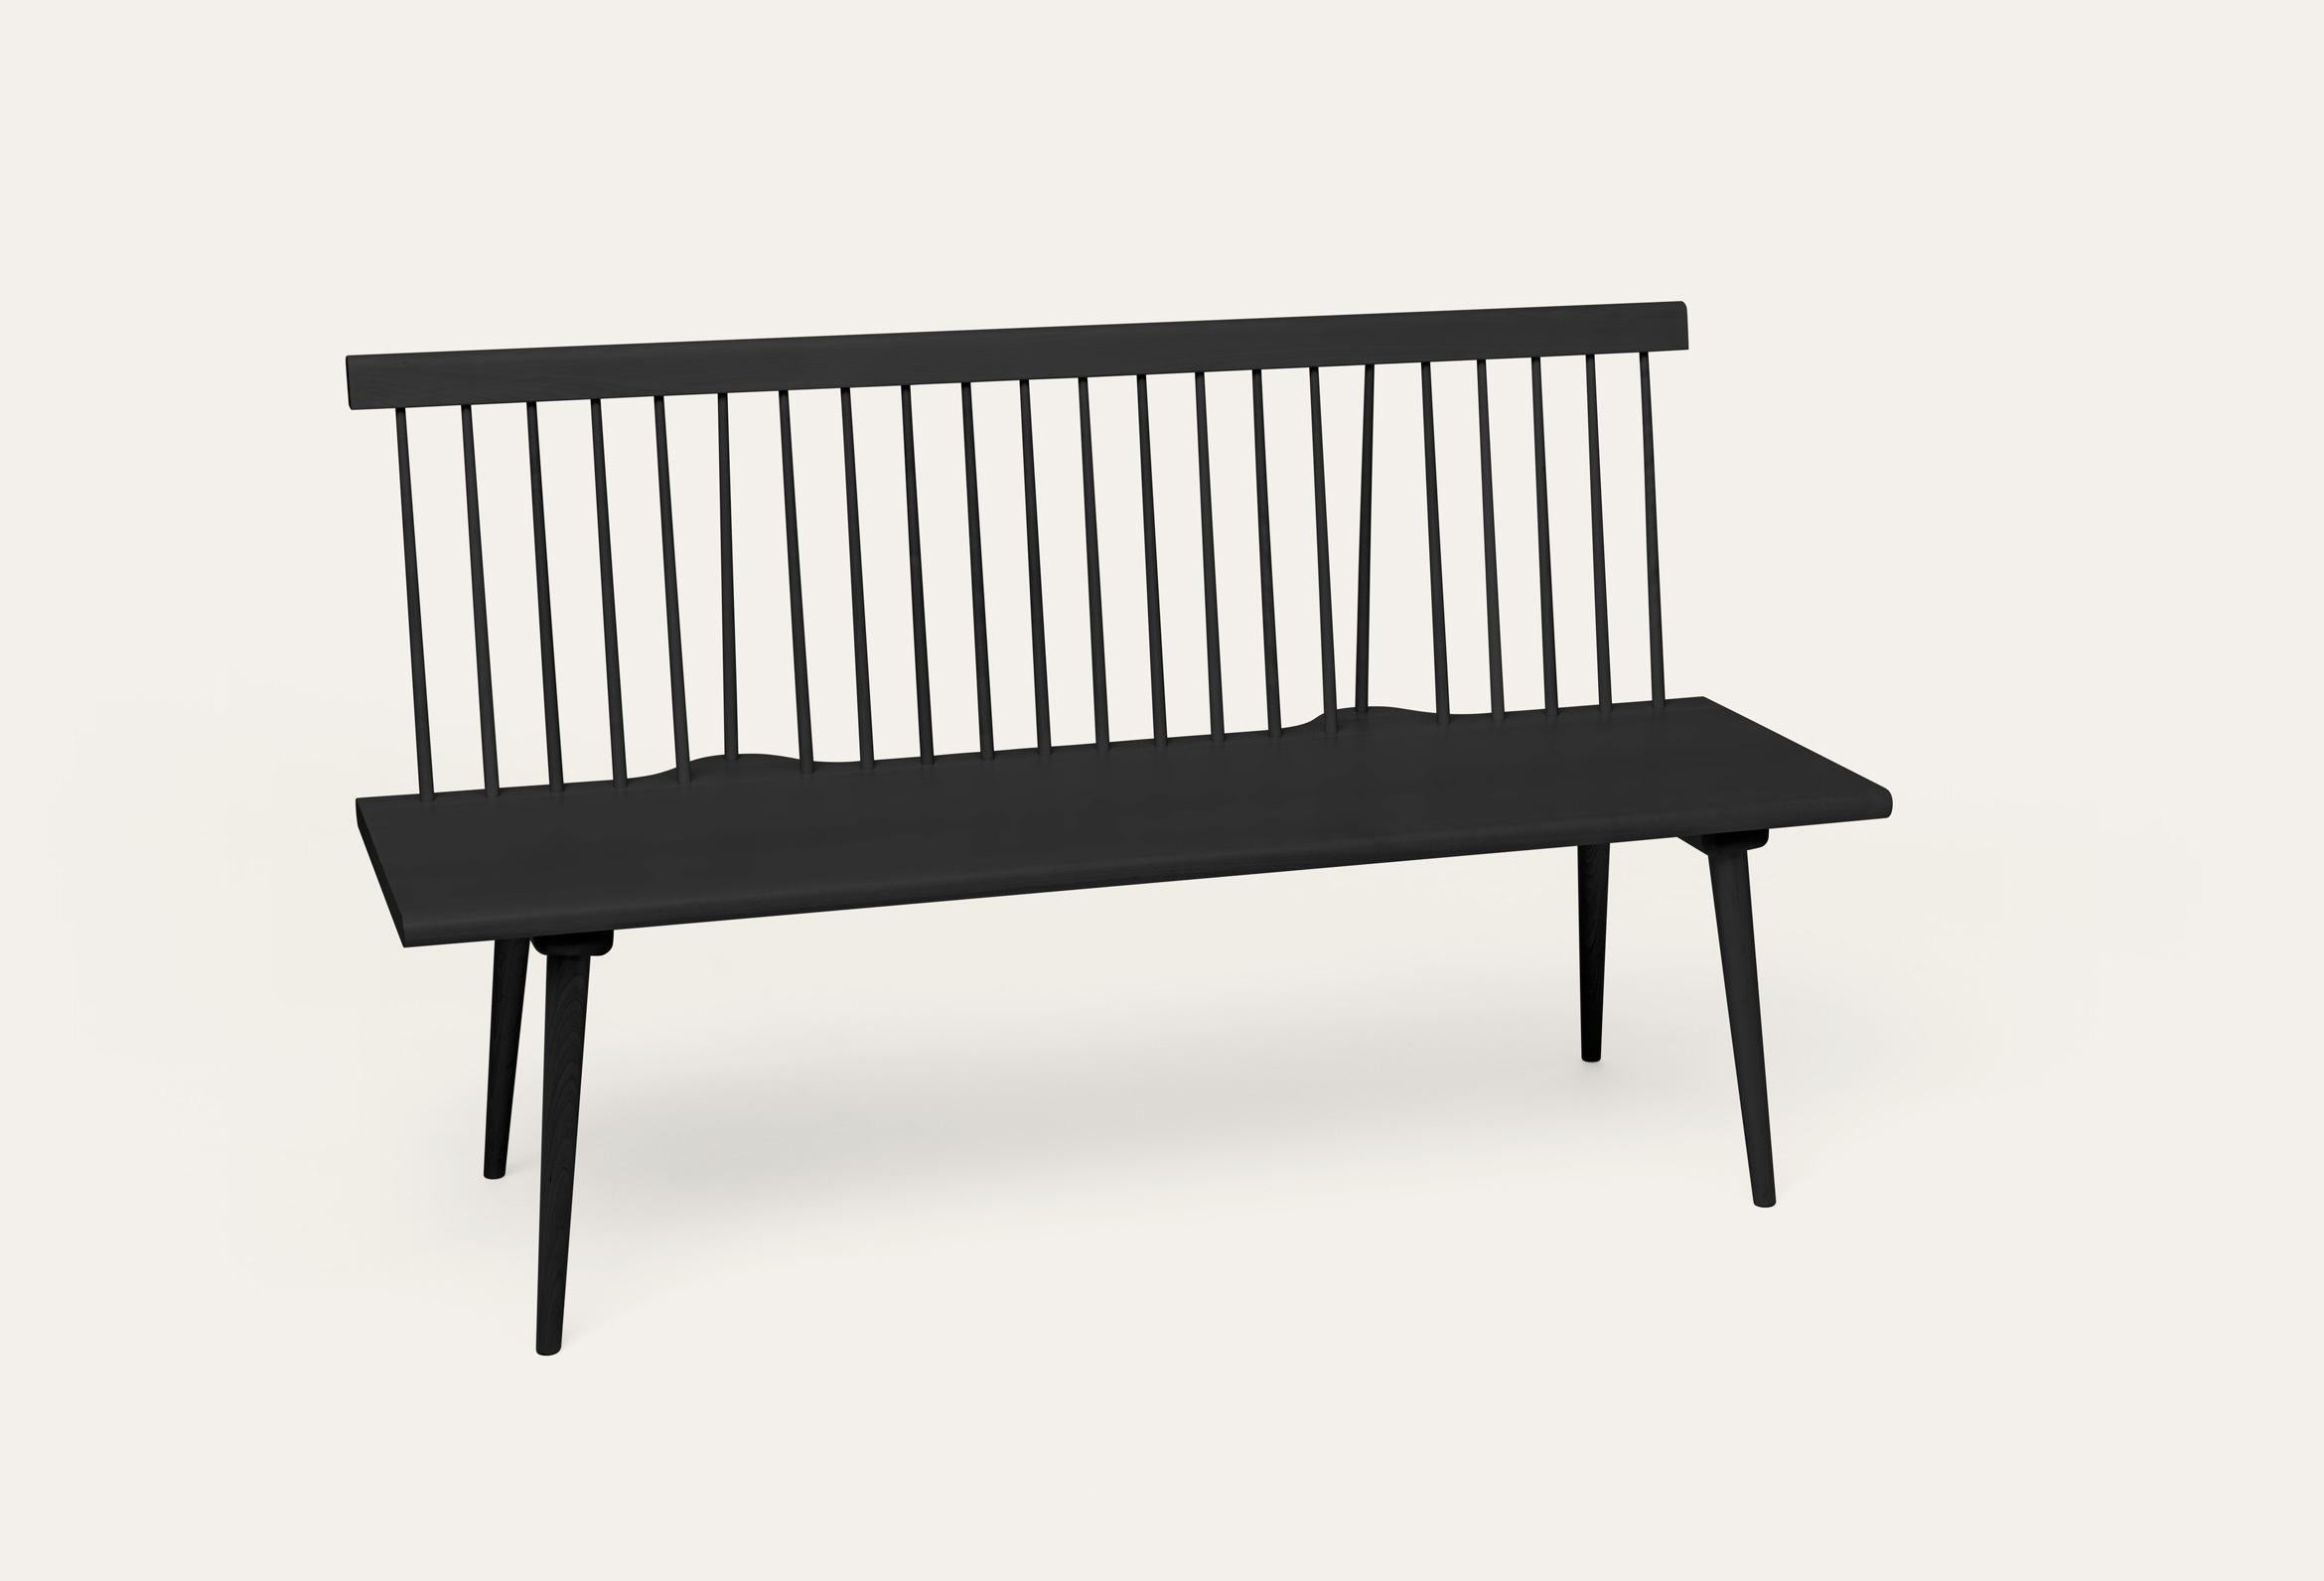 Black Along birch sofa by Storängen Design
Dimensions: D 52 x W 150 x H 87 x SH 45 cm
Materials: birch wood.
Also available in other colors and with seat cushion.

Along can be as long as you want to be. Each module is manufactured separately -